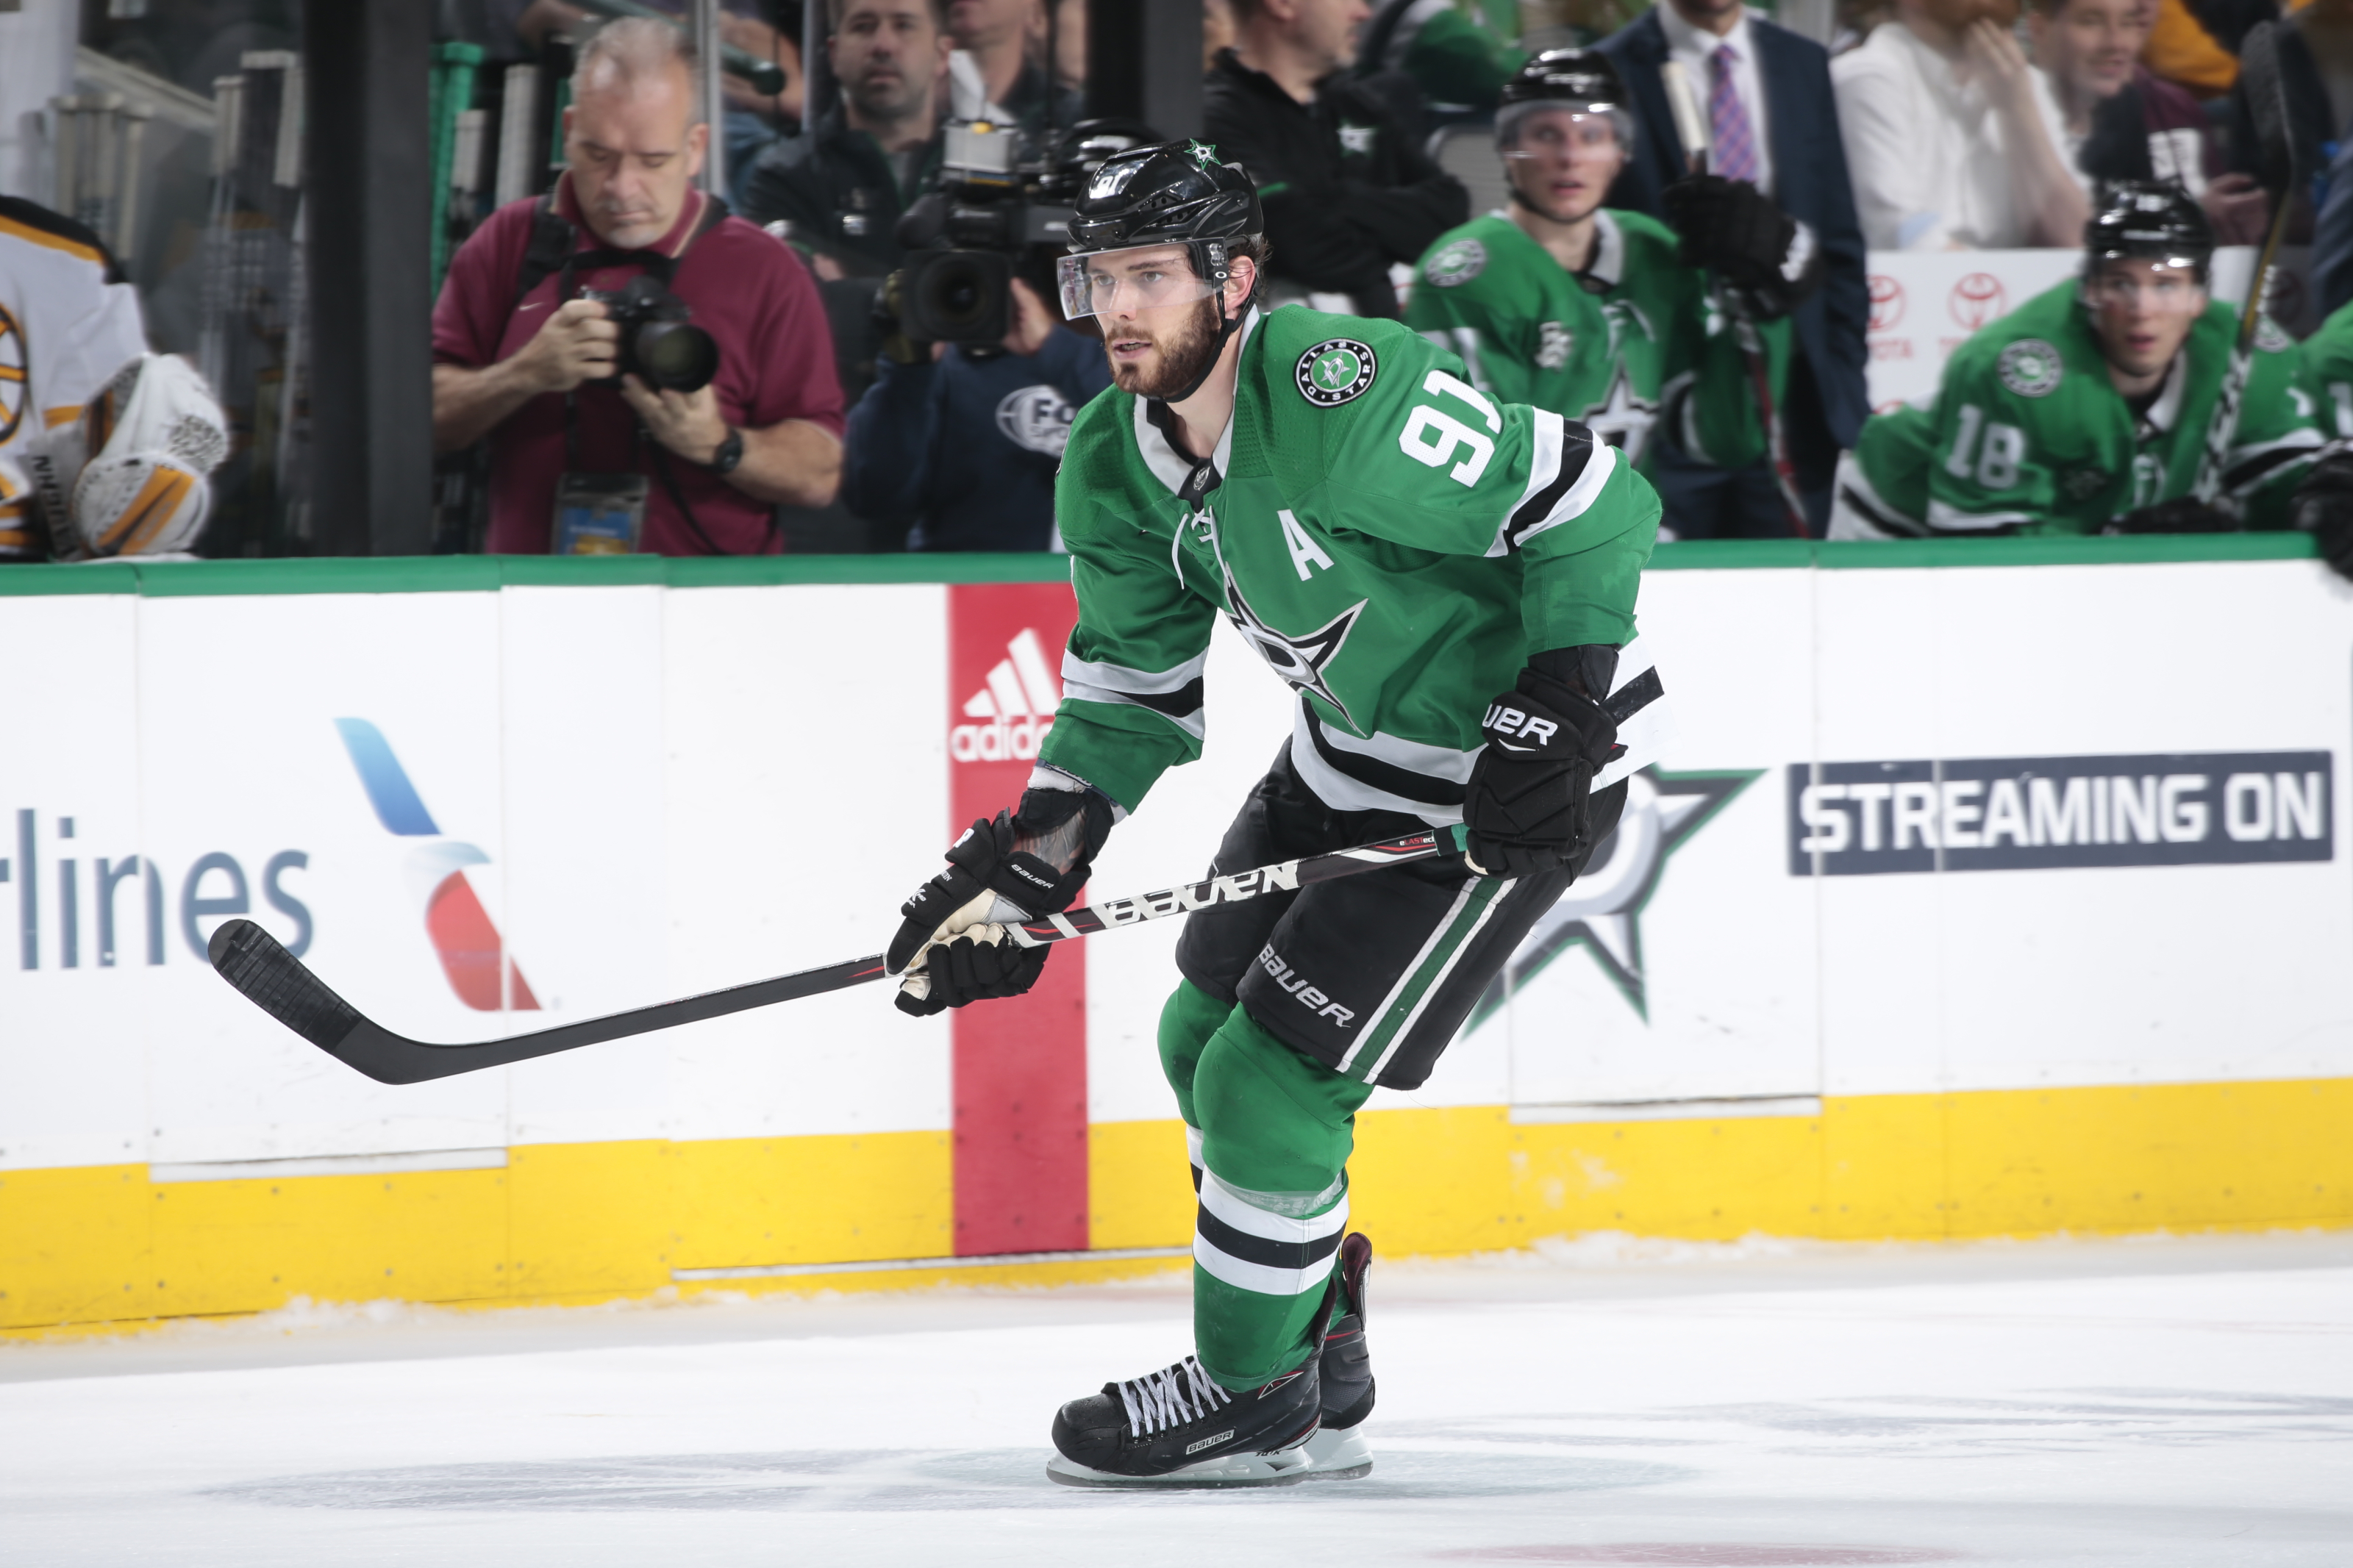 Dallas Stars: Assessing the 2019-20 Cap Situation After Seguin's Deal